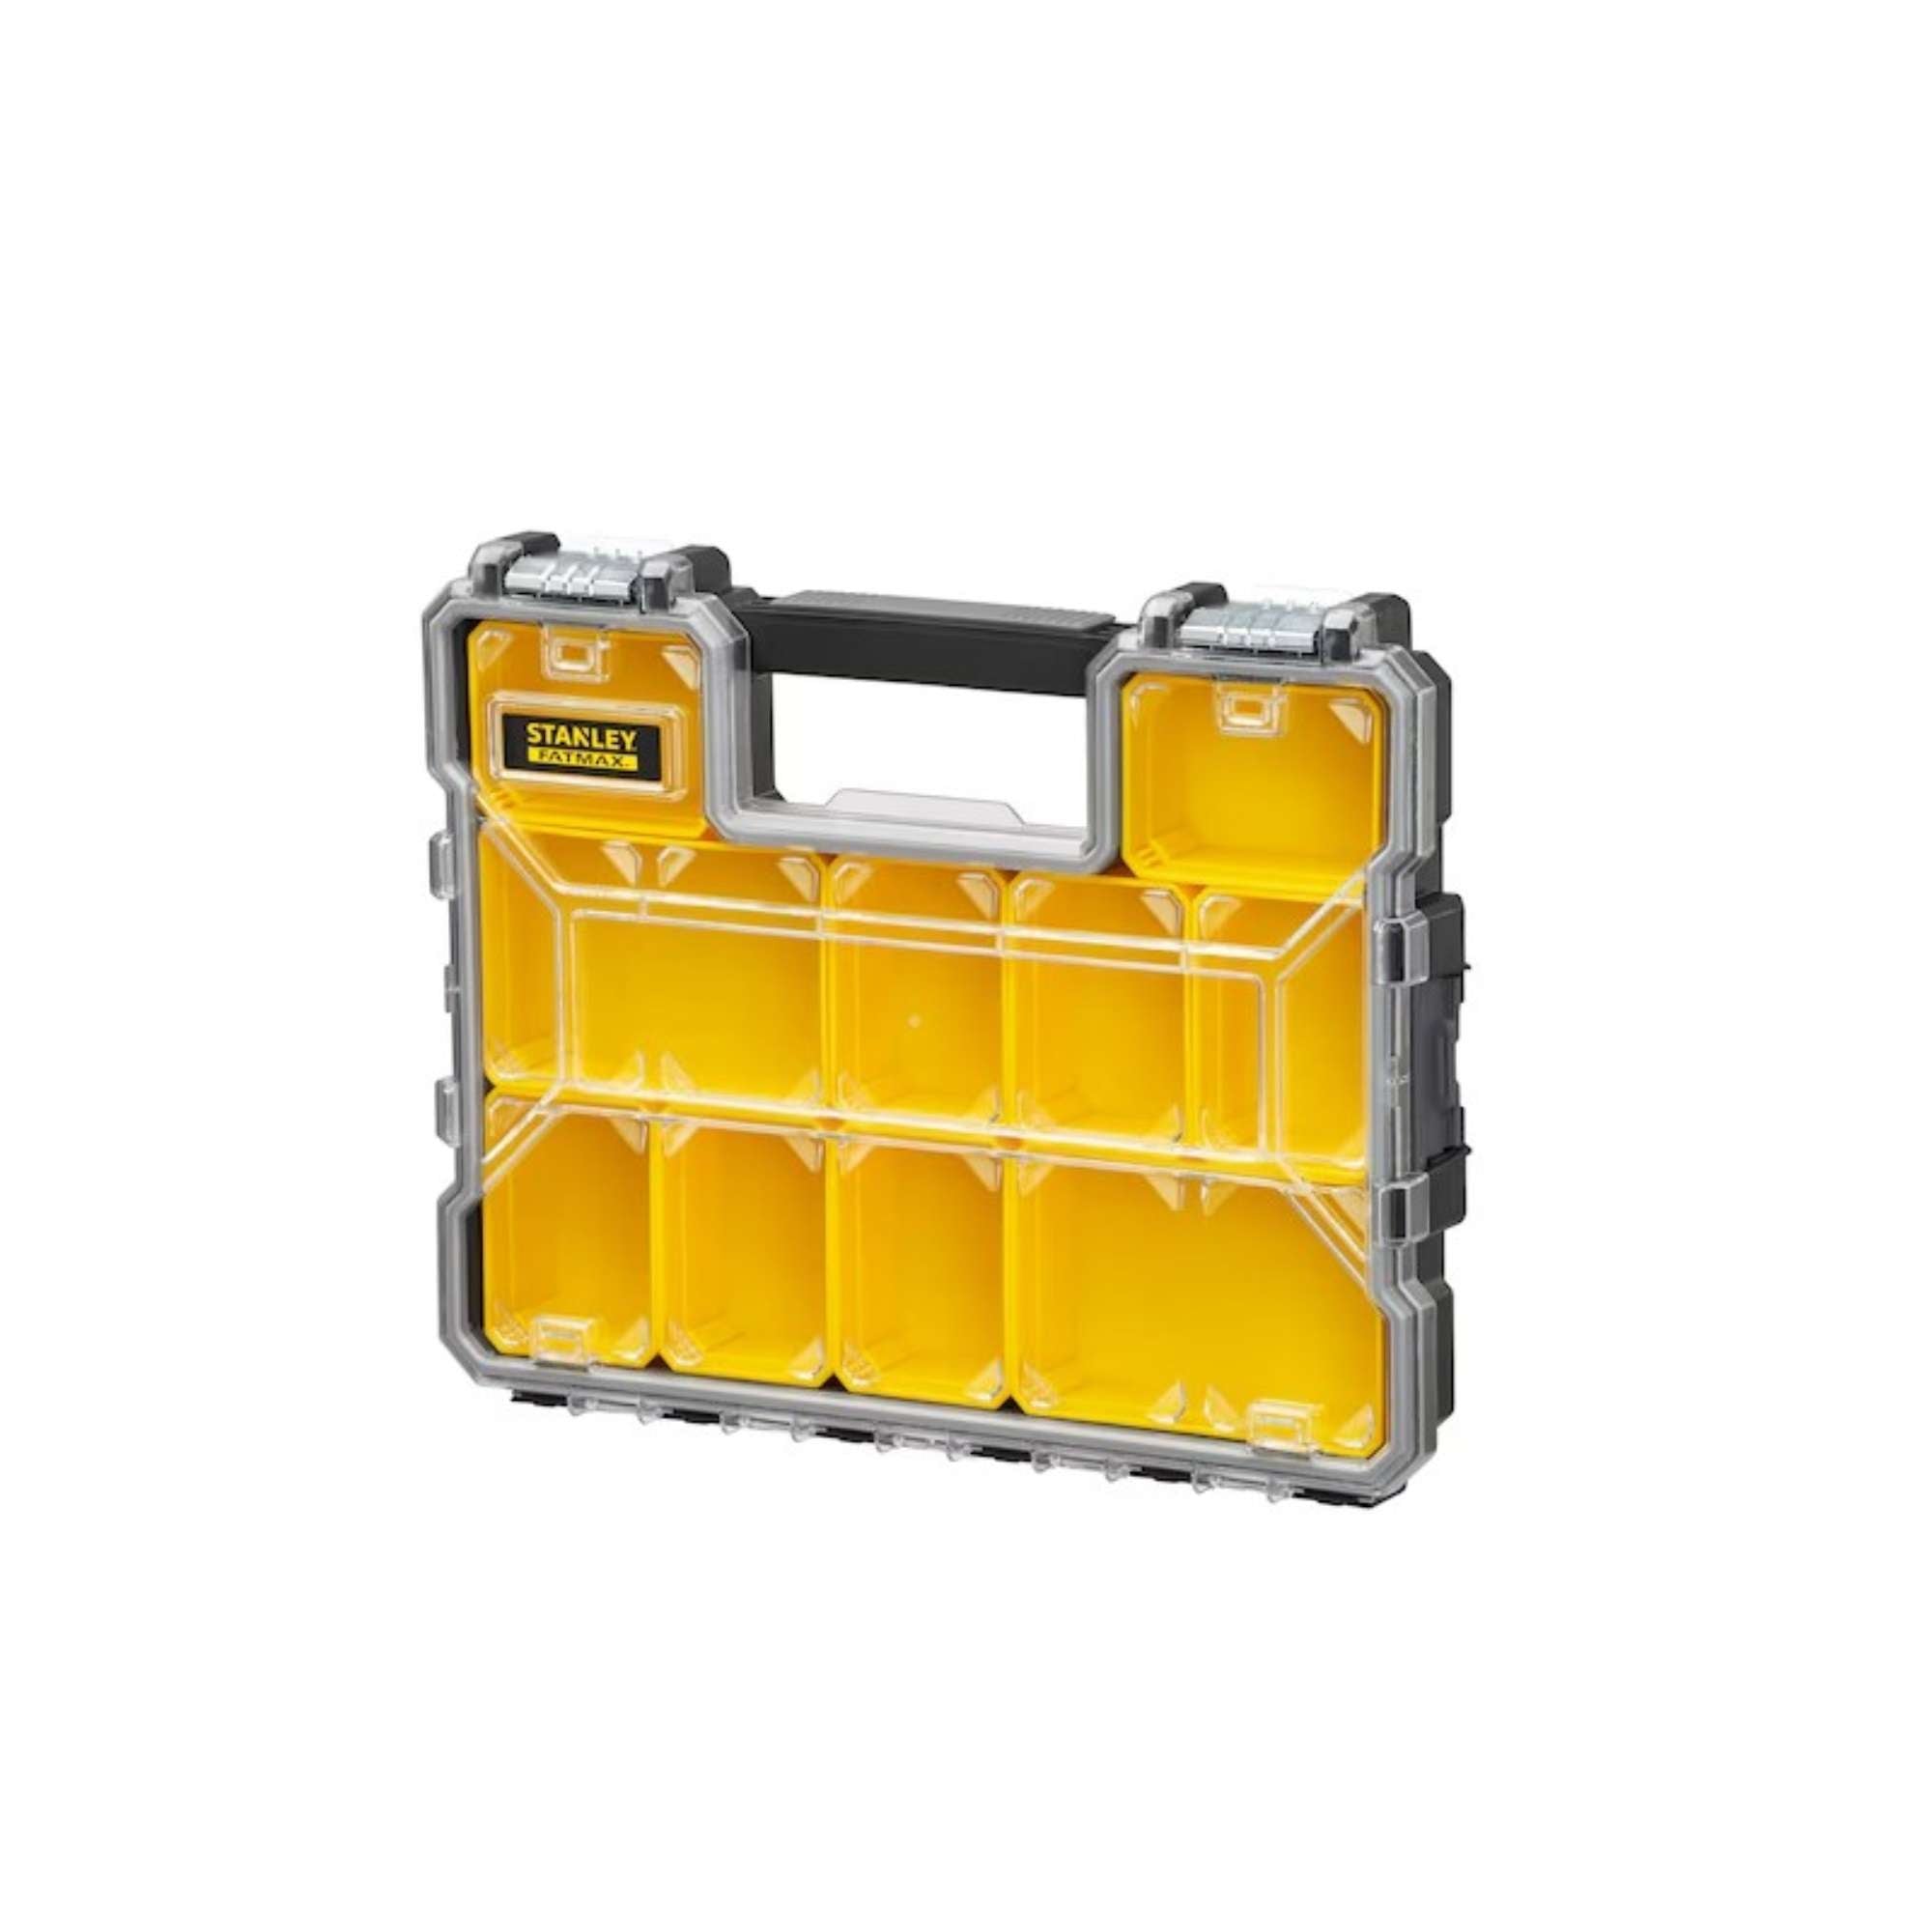 Professional low organizer with metal closures STANLEY FATMAX 1-97-517